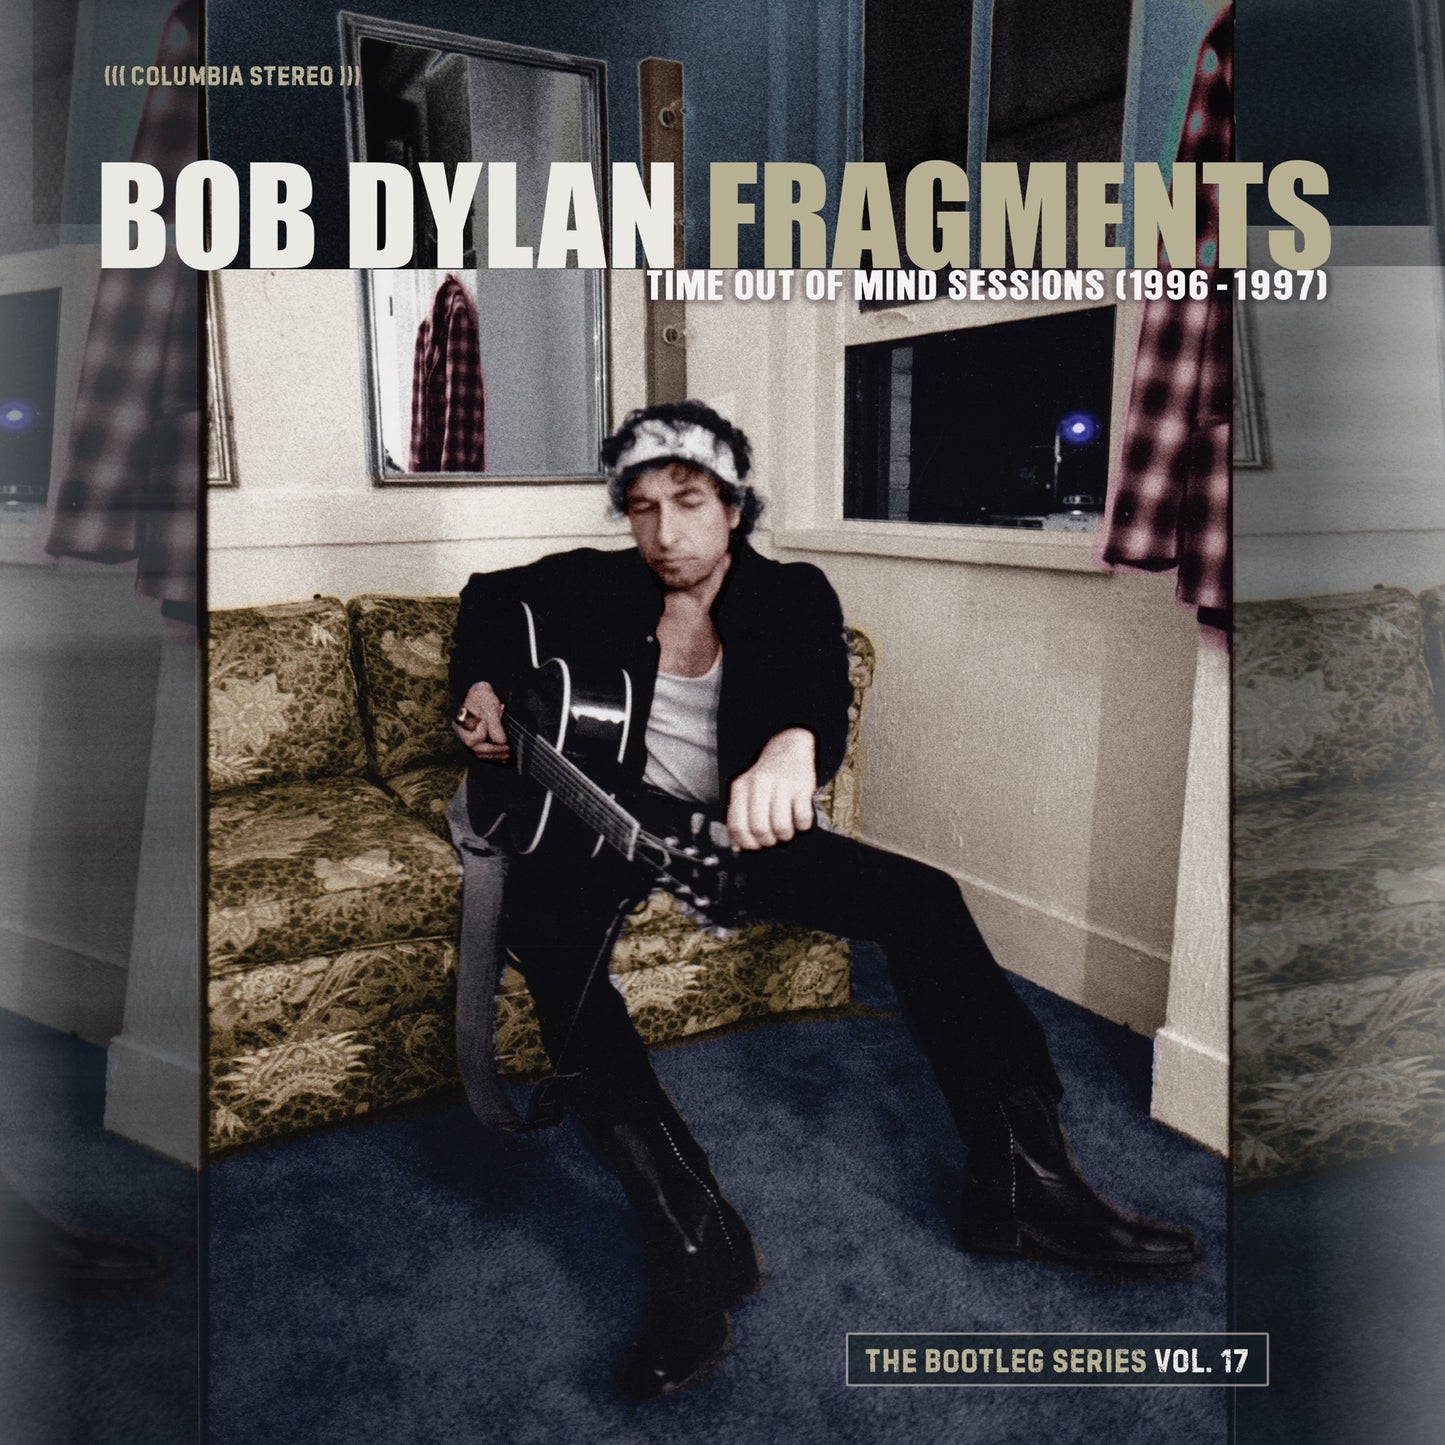 FRAGMENTS - TIME OUT OF MIND SESSIONS (1996-1997): THE BOOTLEG SERIES VOL. 17 VINYL